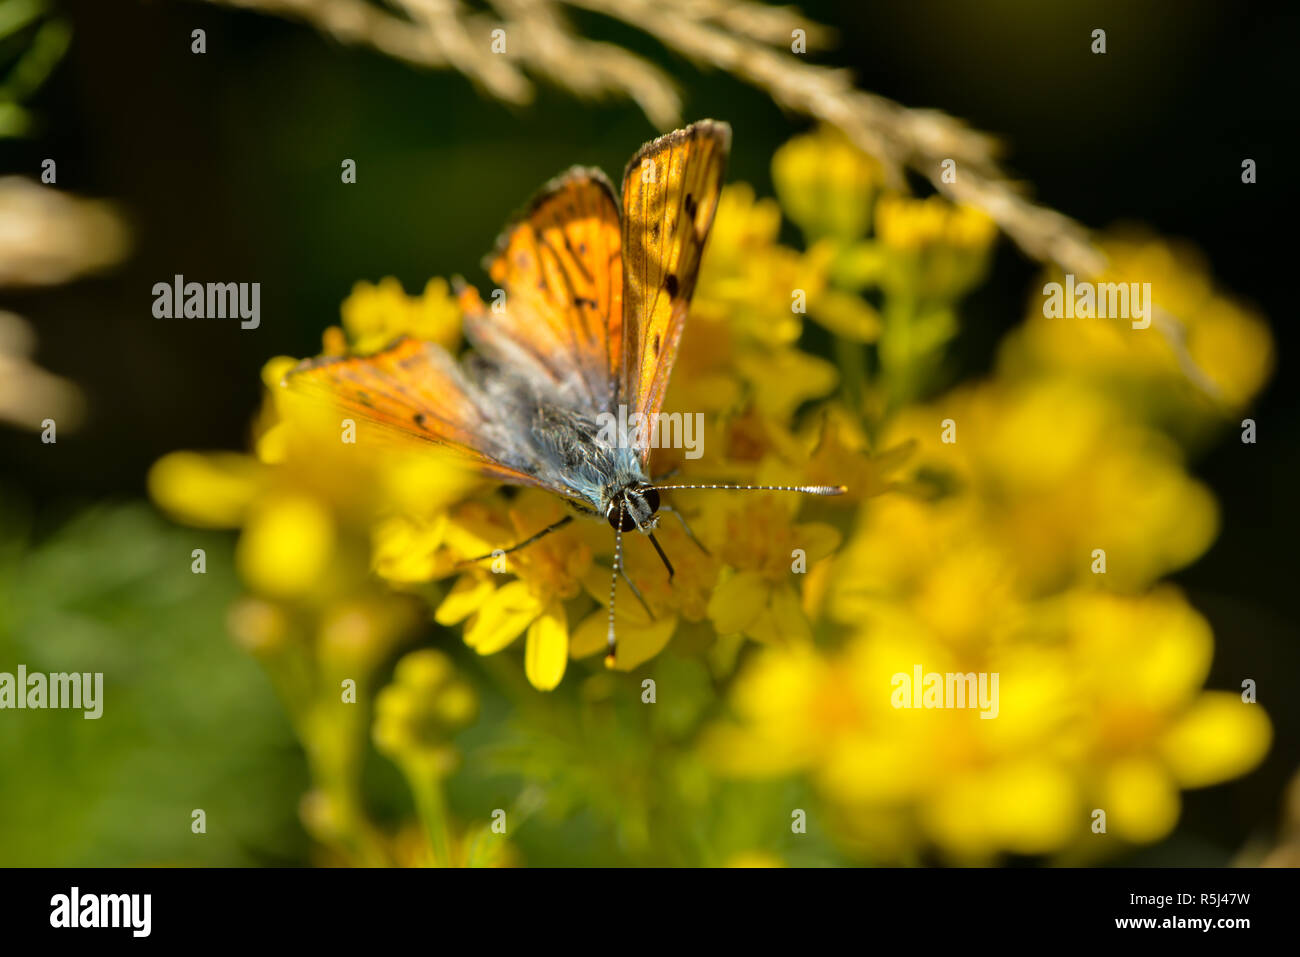 large firefly sits on a yellow blossom Stock Photo